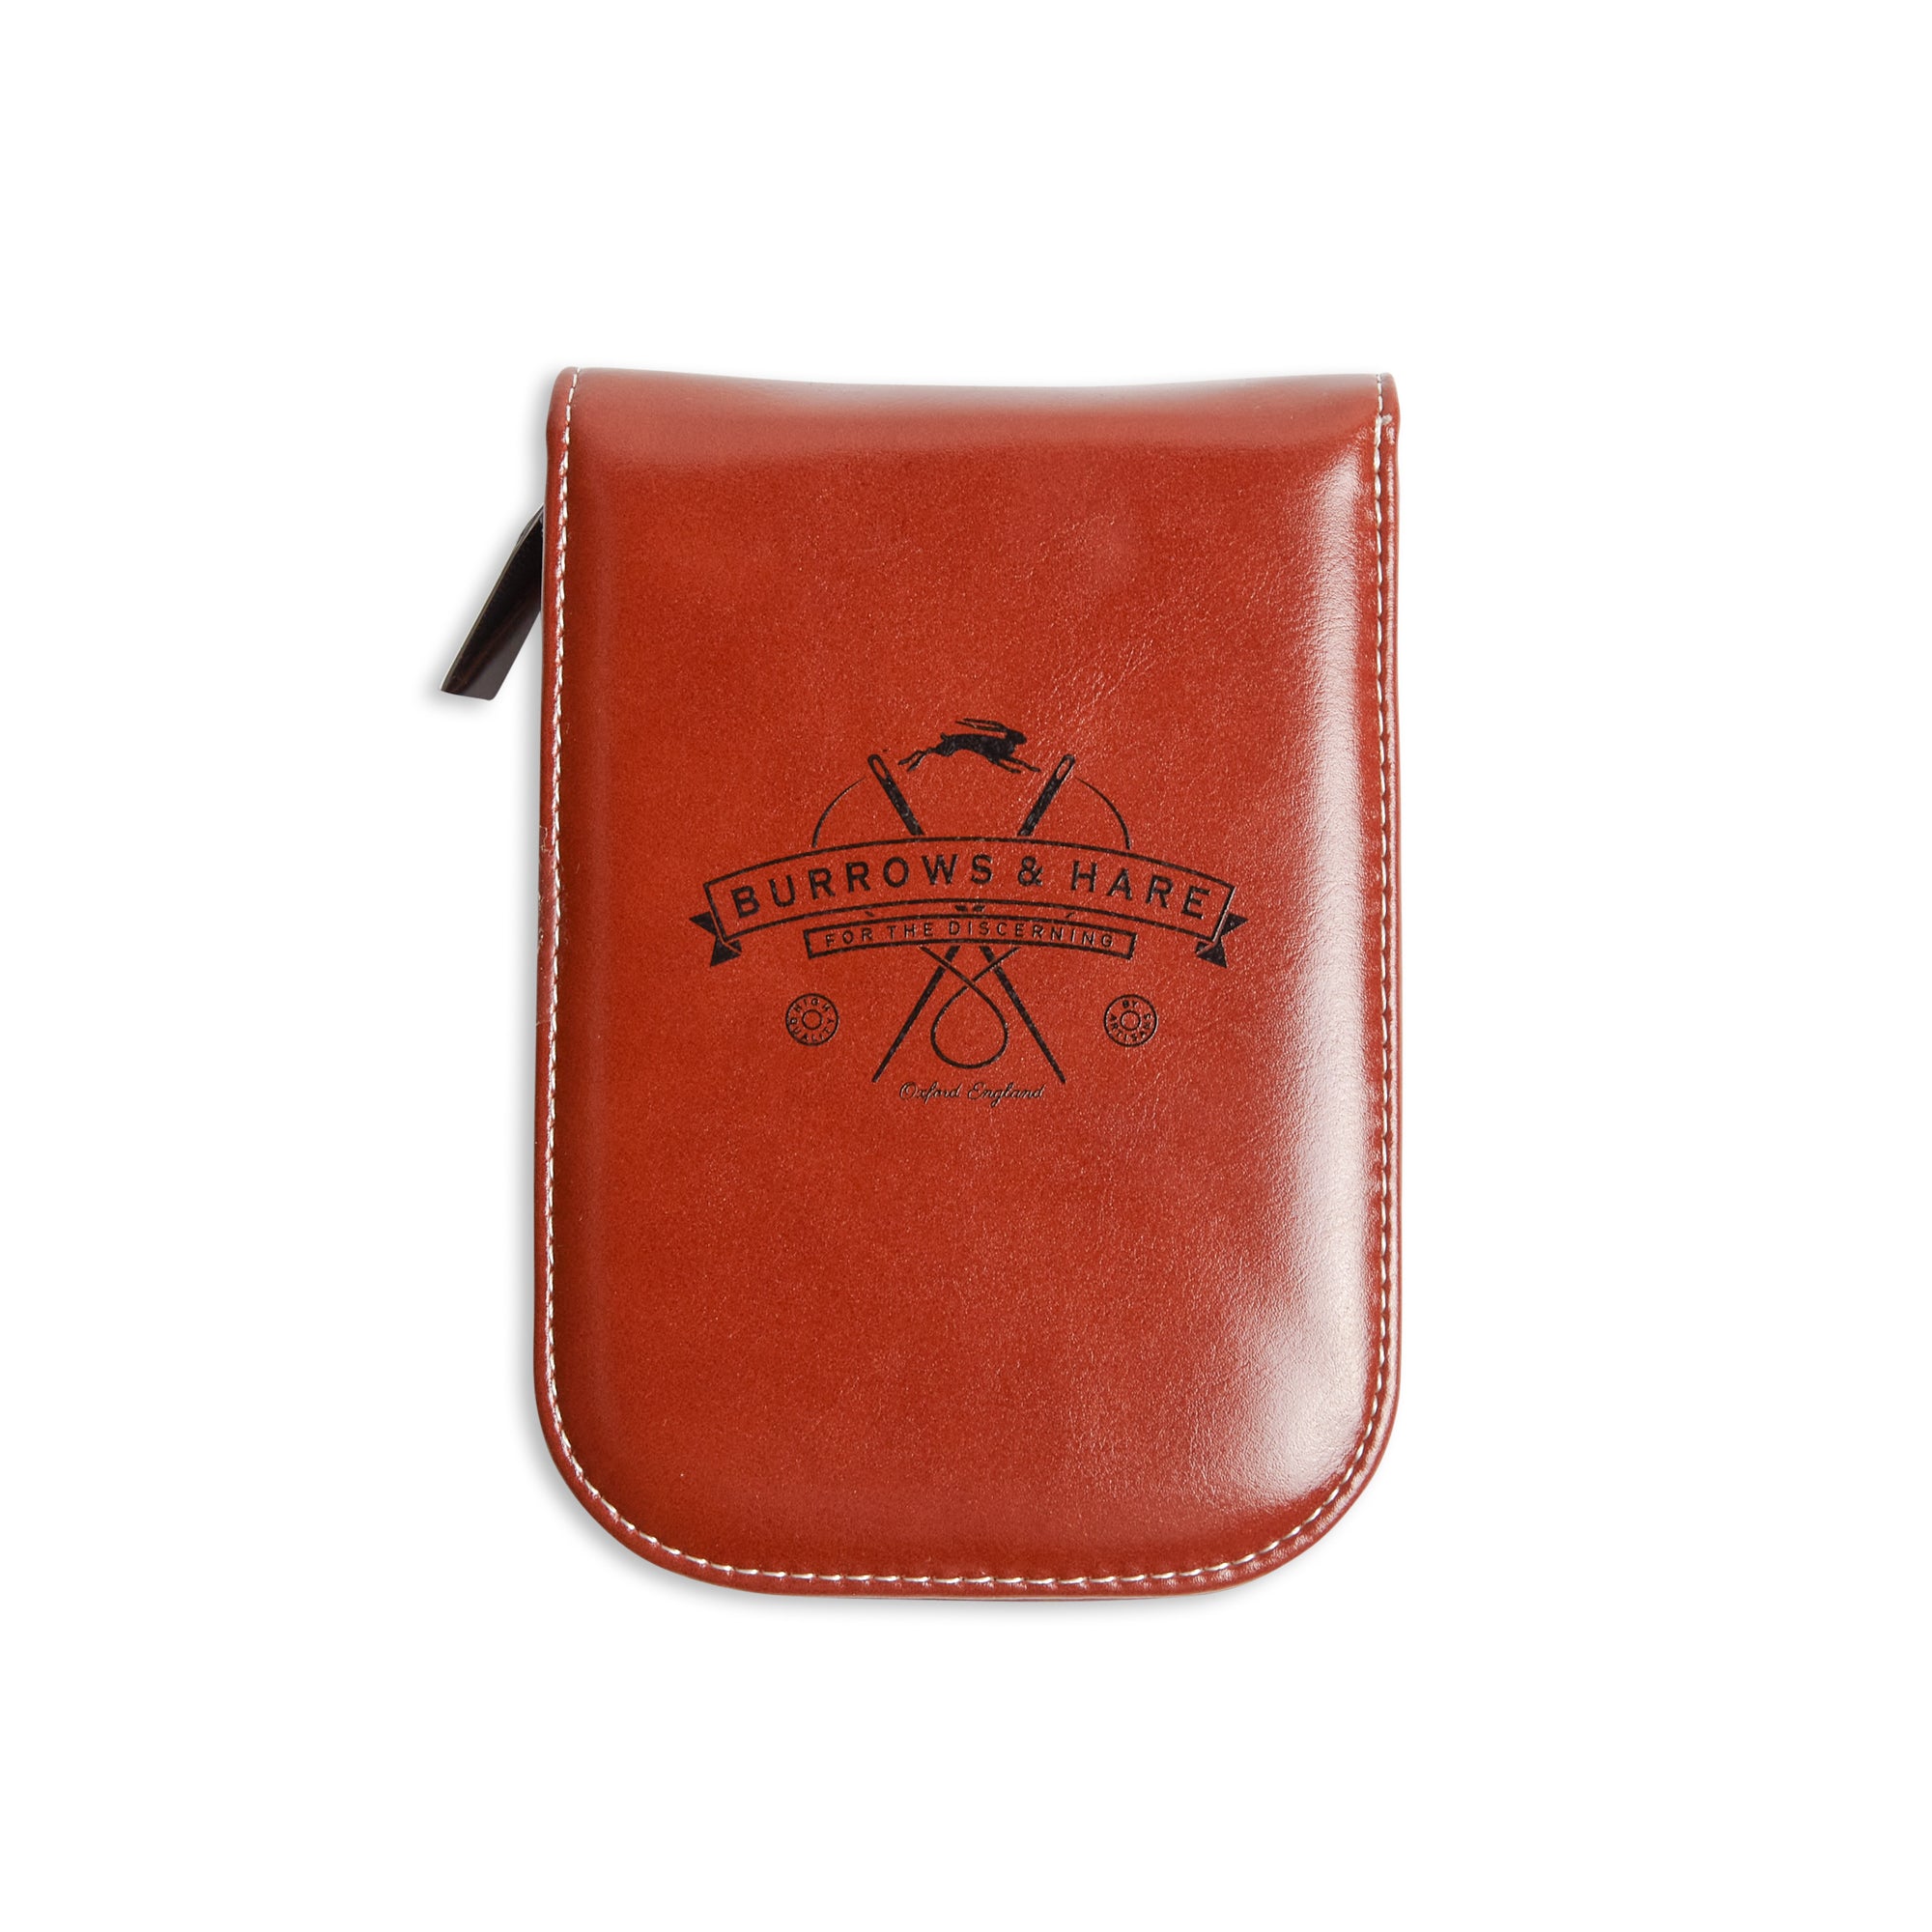 Burrows & Hare  Leather Travel Shaving Case